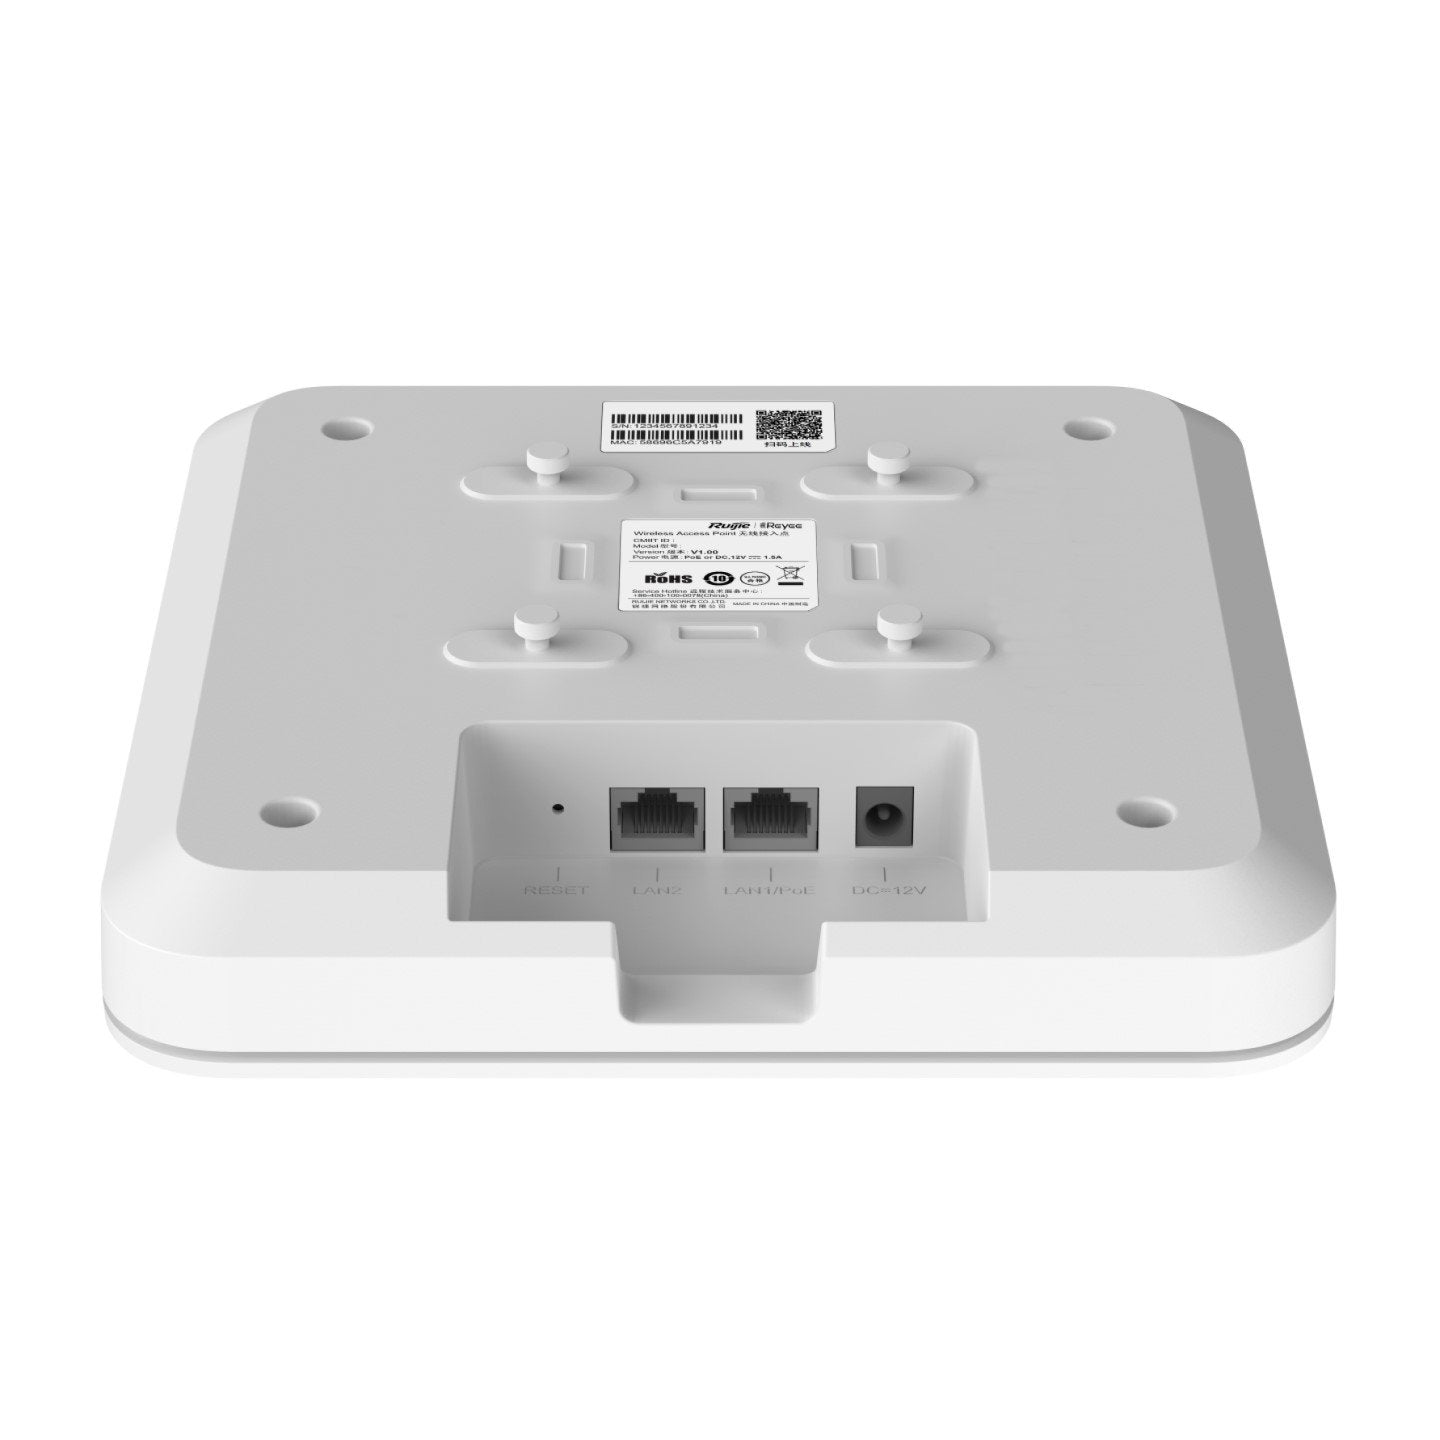 Ruijie* Reyee Internal WiFi6 Gigabit Access Point AX3200, 1770Mbps, Dual Band Up To 3202Mbps, POE / 12VDC (Up To 30M Range)